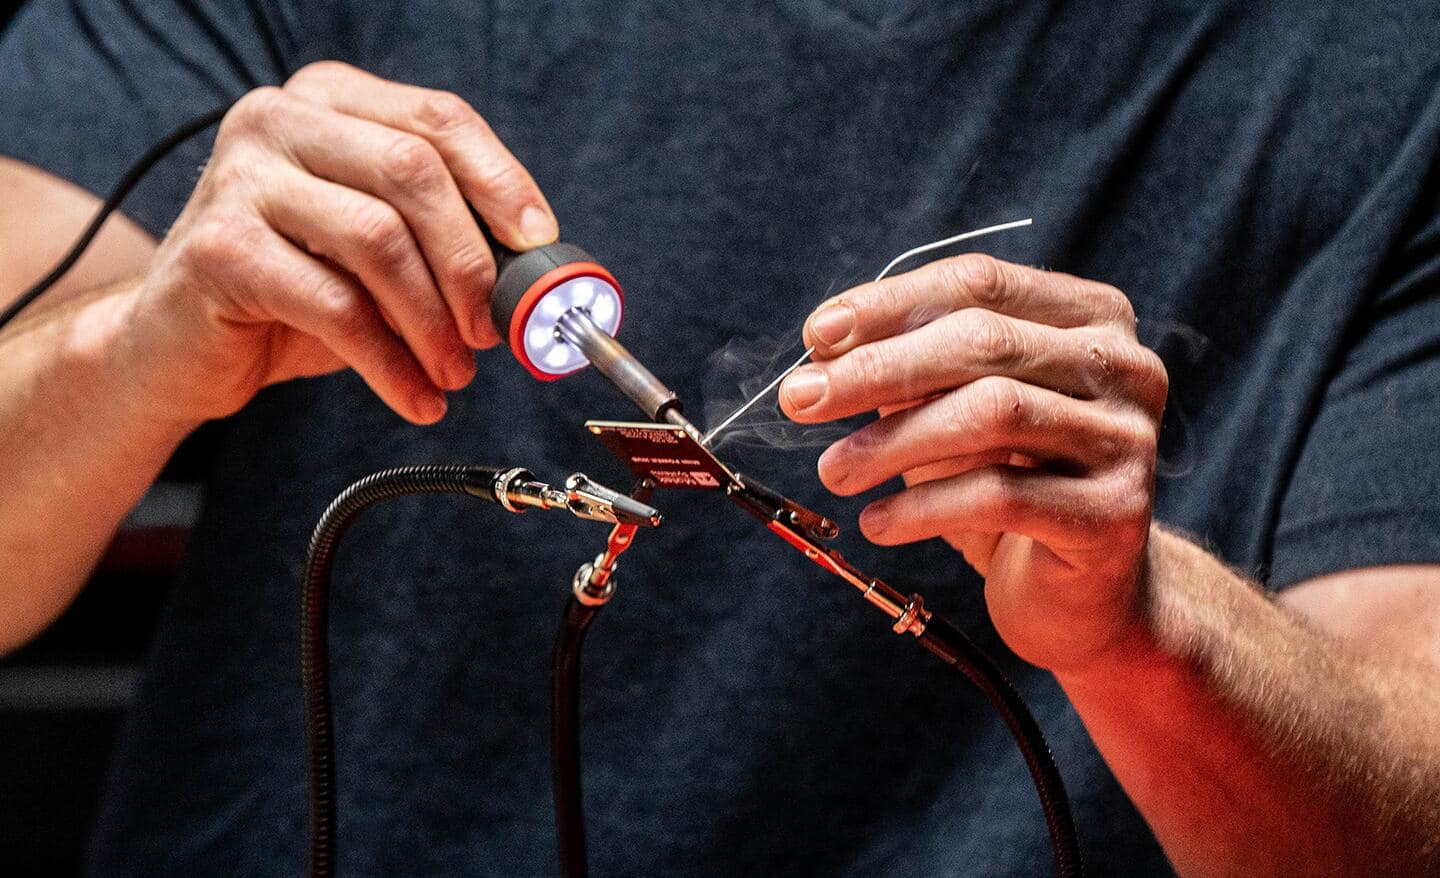 A man uses a soldering iron to make a connection on a small circuit board.